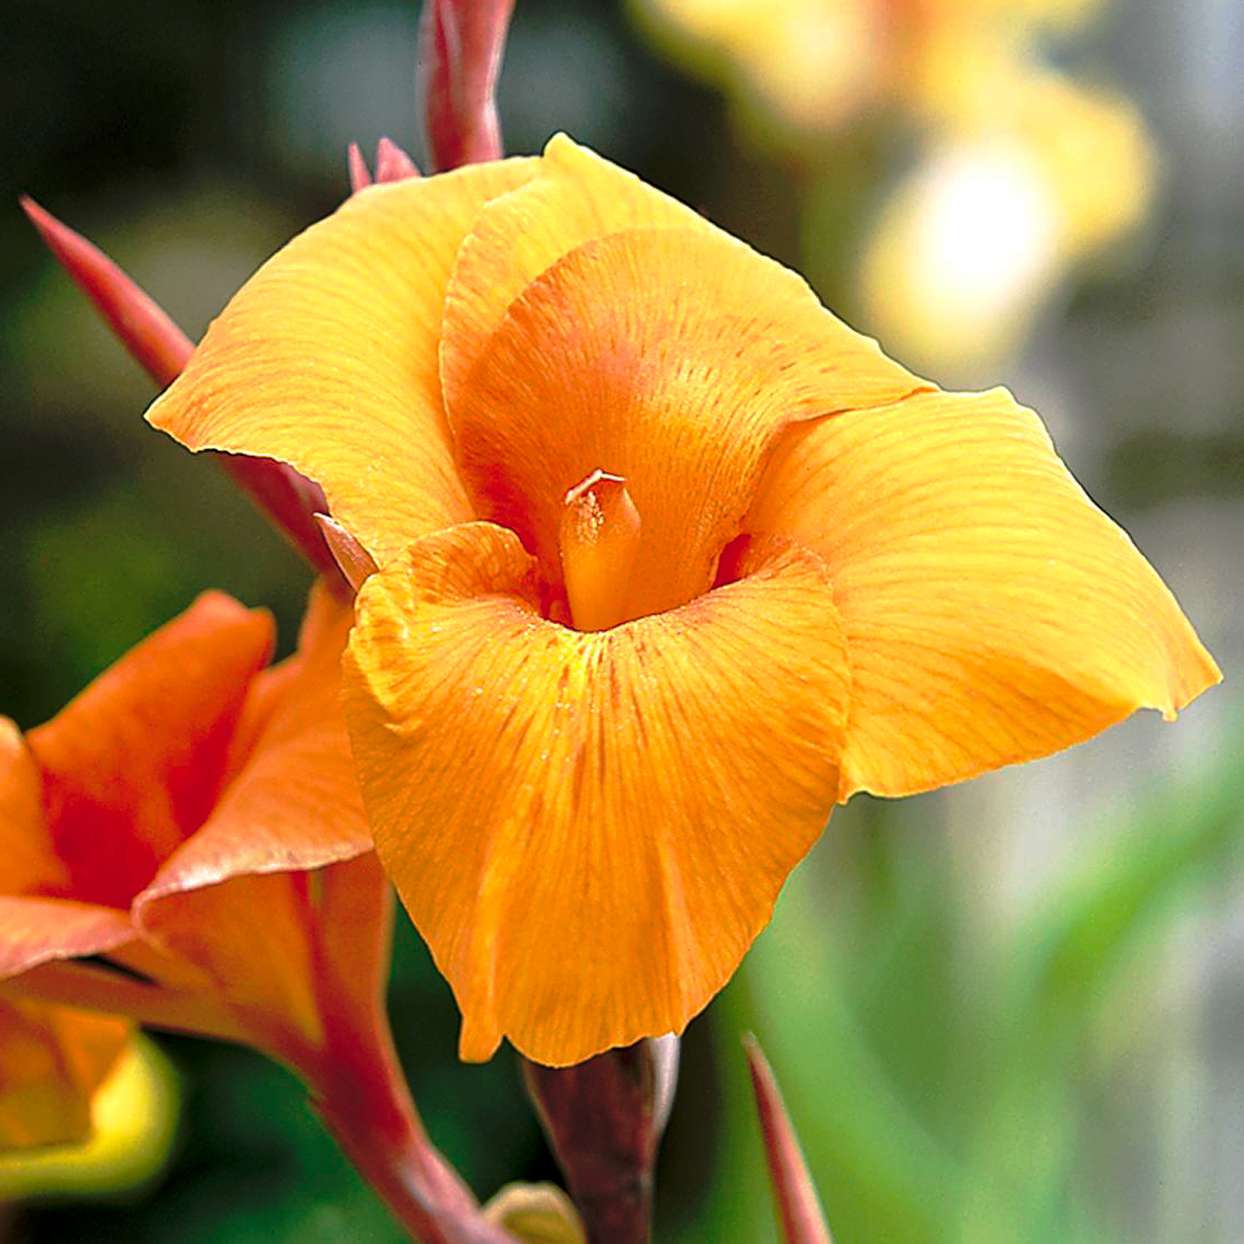 Wyoming canna with ginger-orange petals